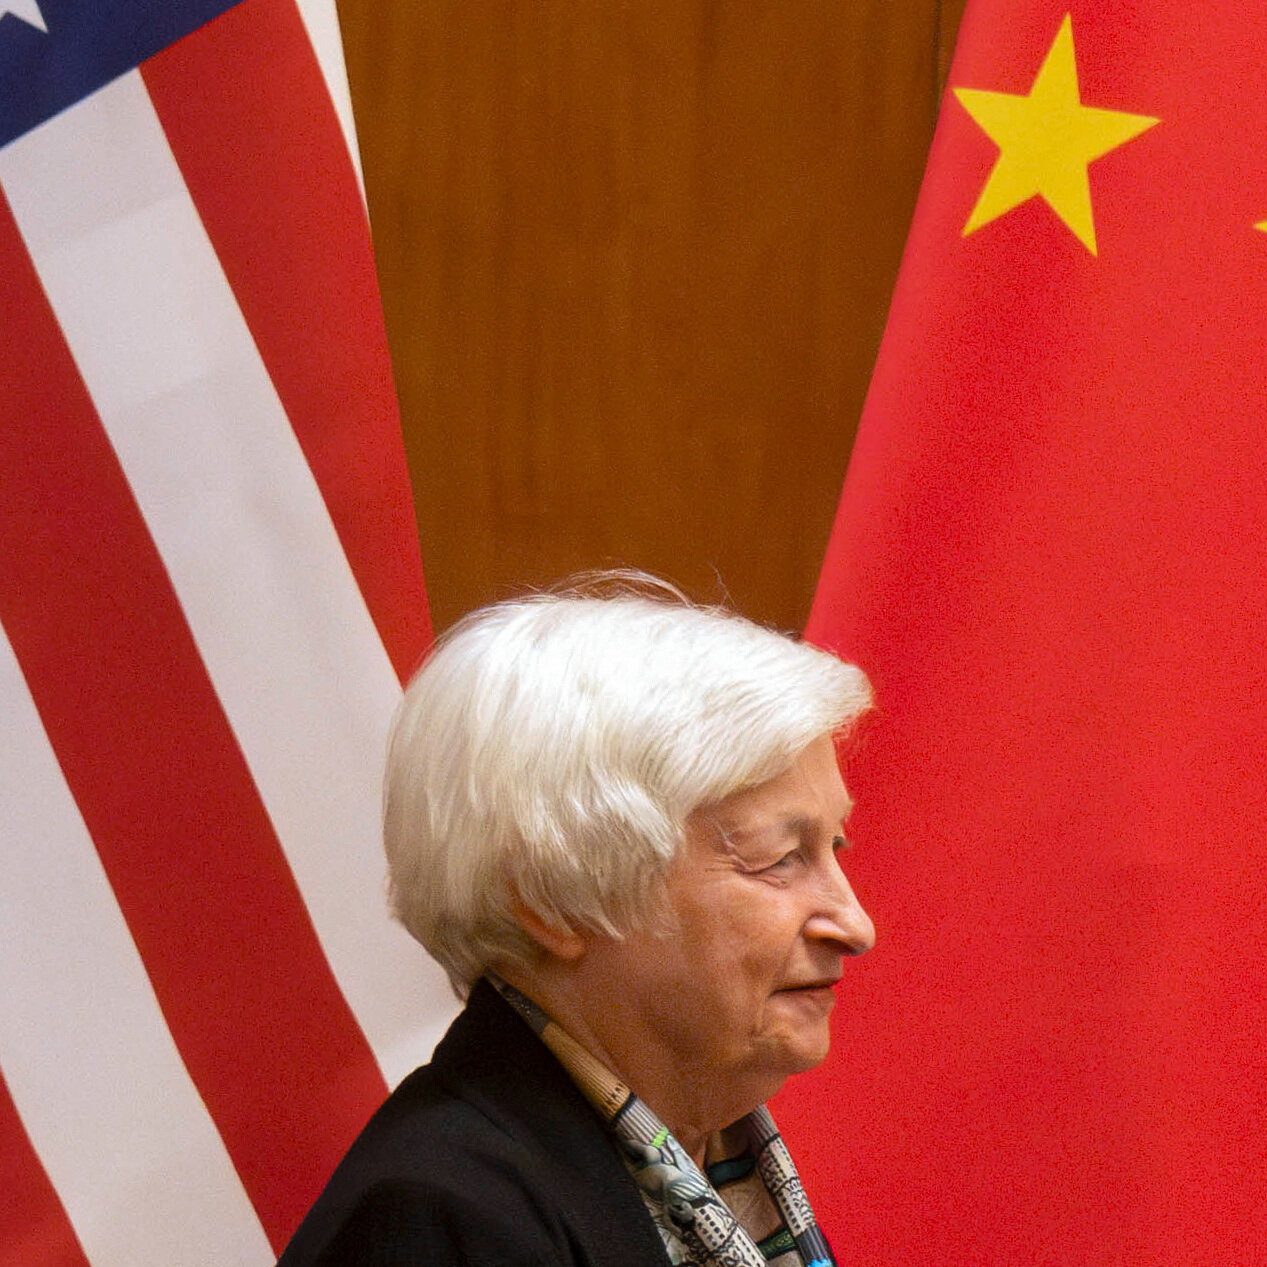 U.S. and China Continue to Talk, but Economic Divide Remains Wide